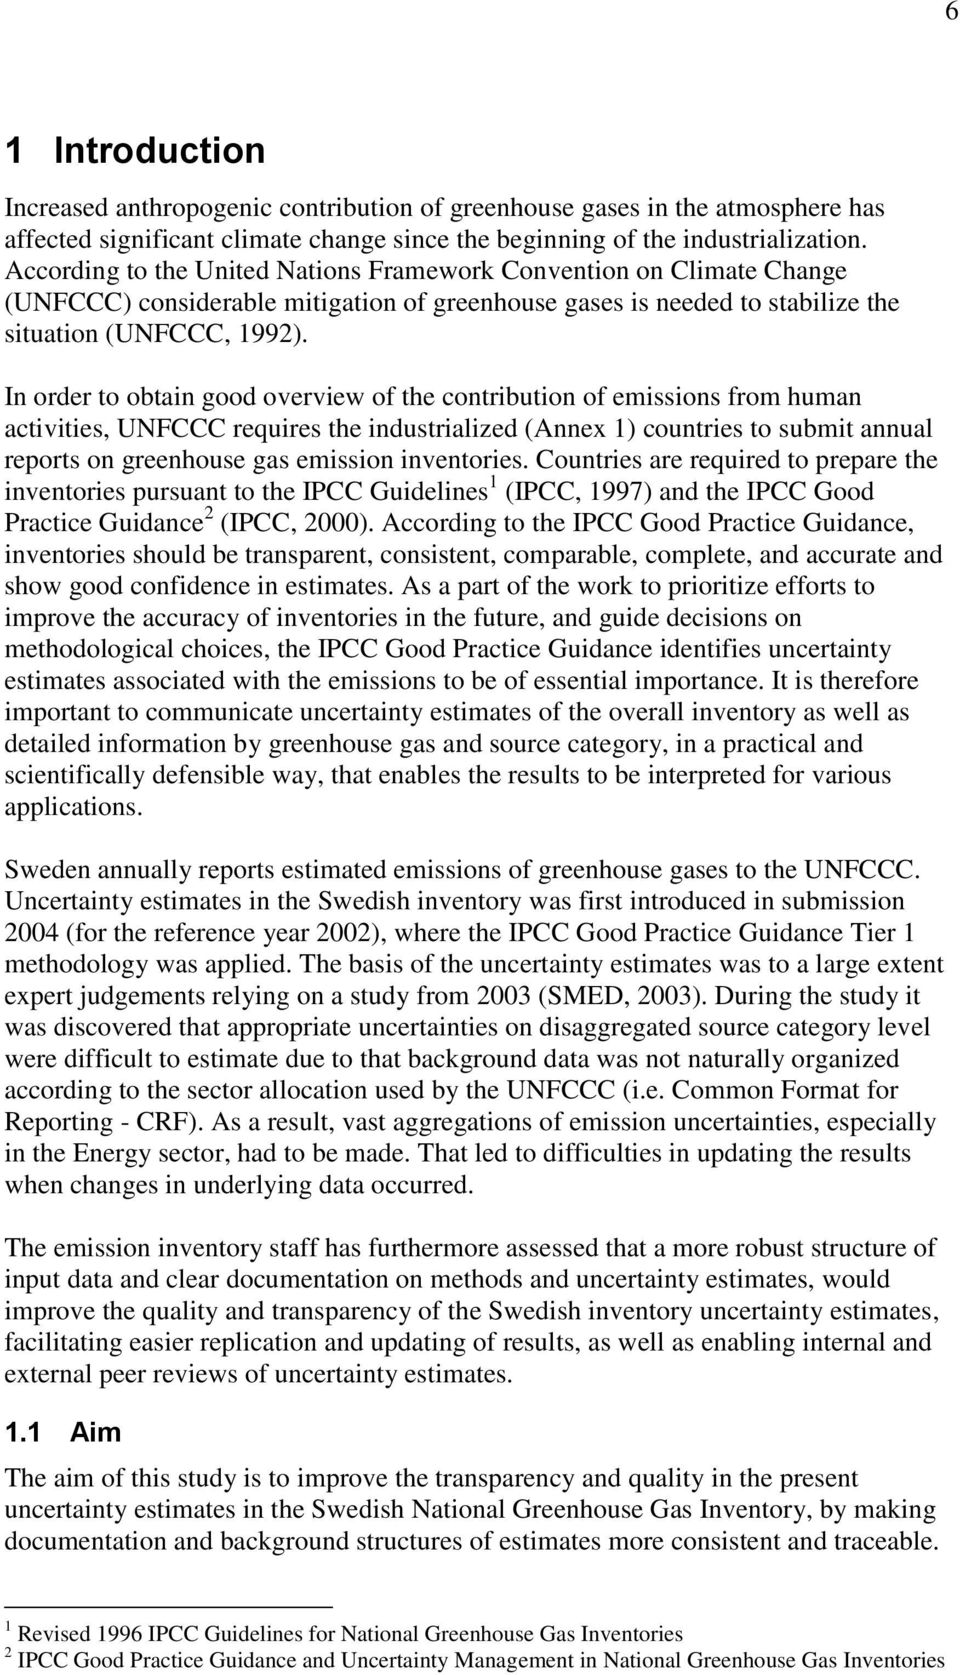 In order to obtain good overview of the contribution of from human activities, UNFCCC requires the industrialized (Annex 1) countries to submit annual reports on greenhouse gas emission inventories.